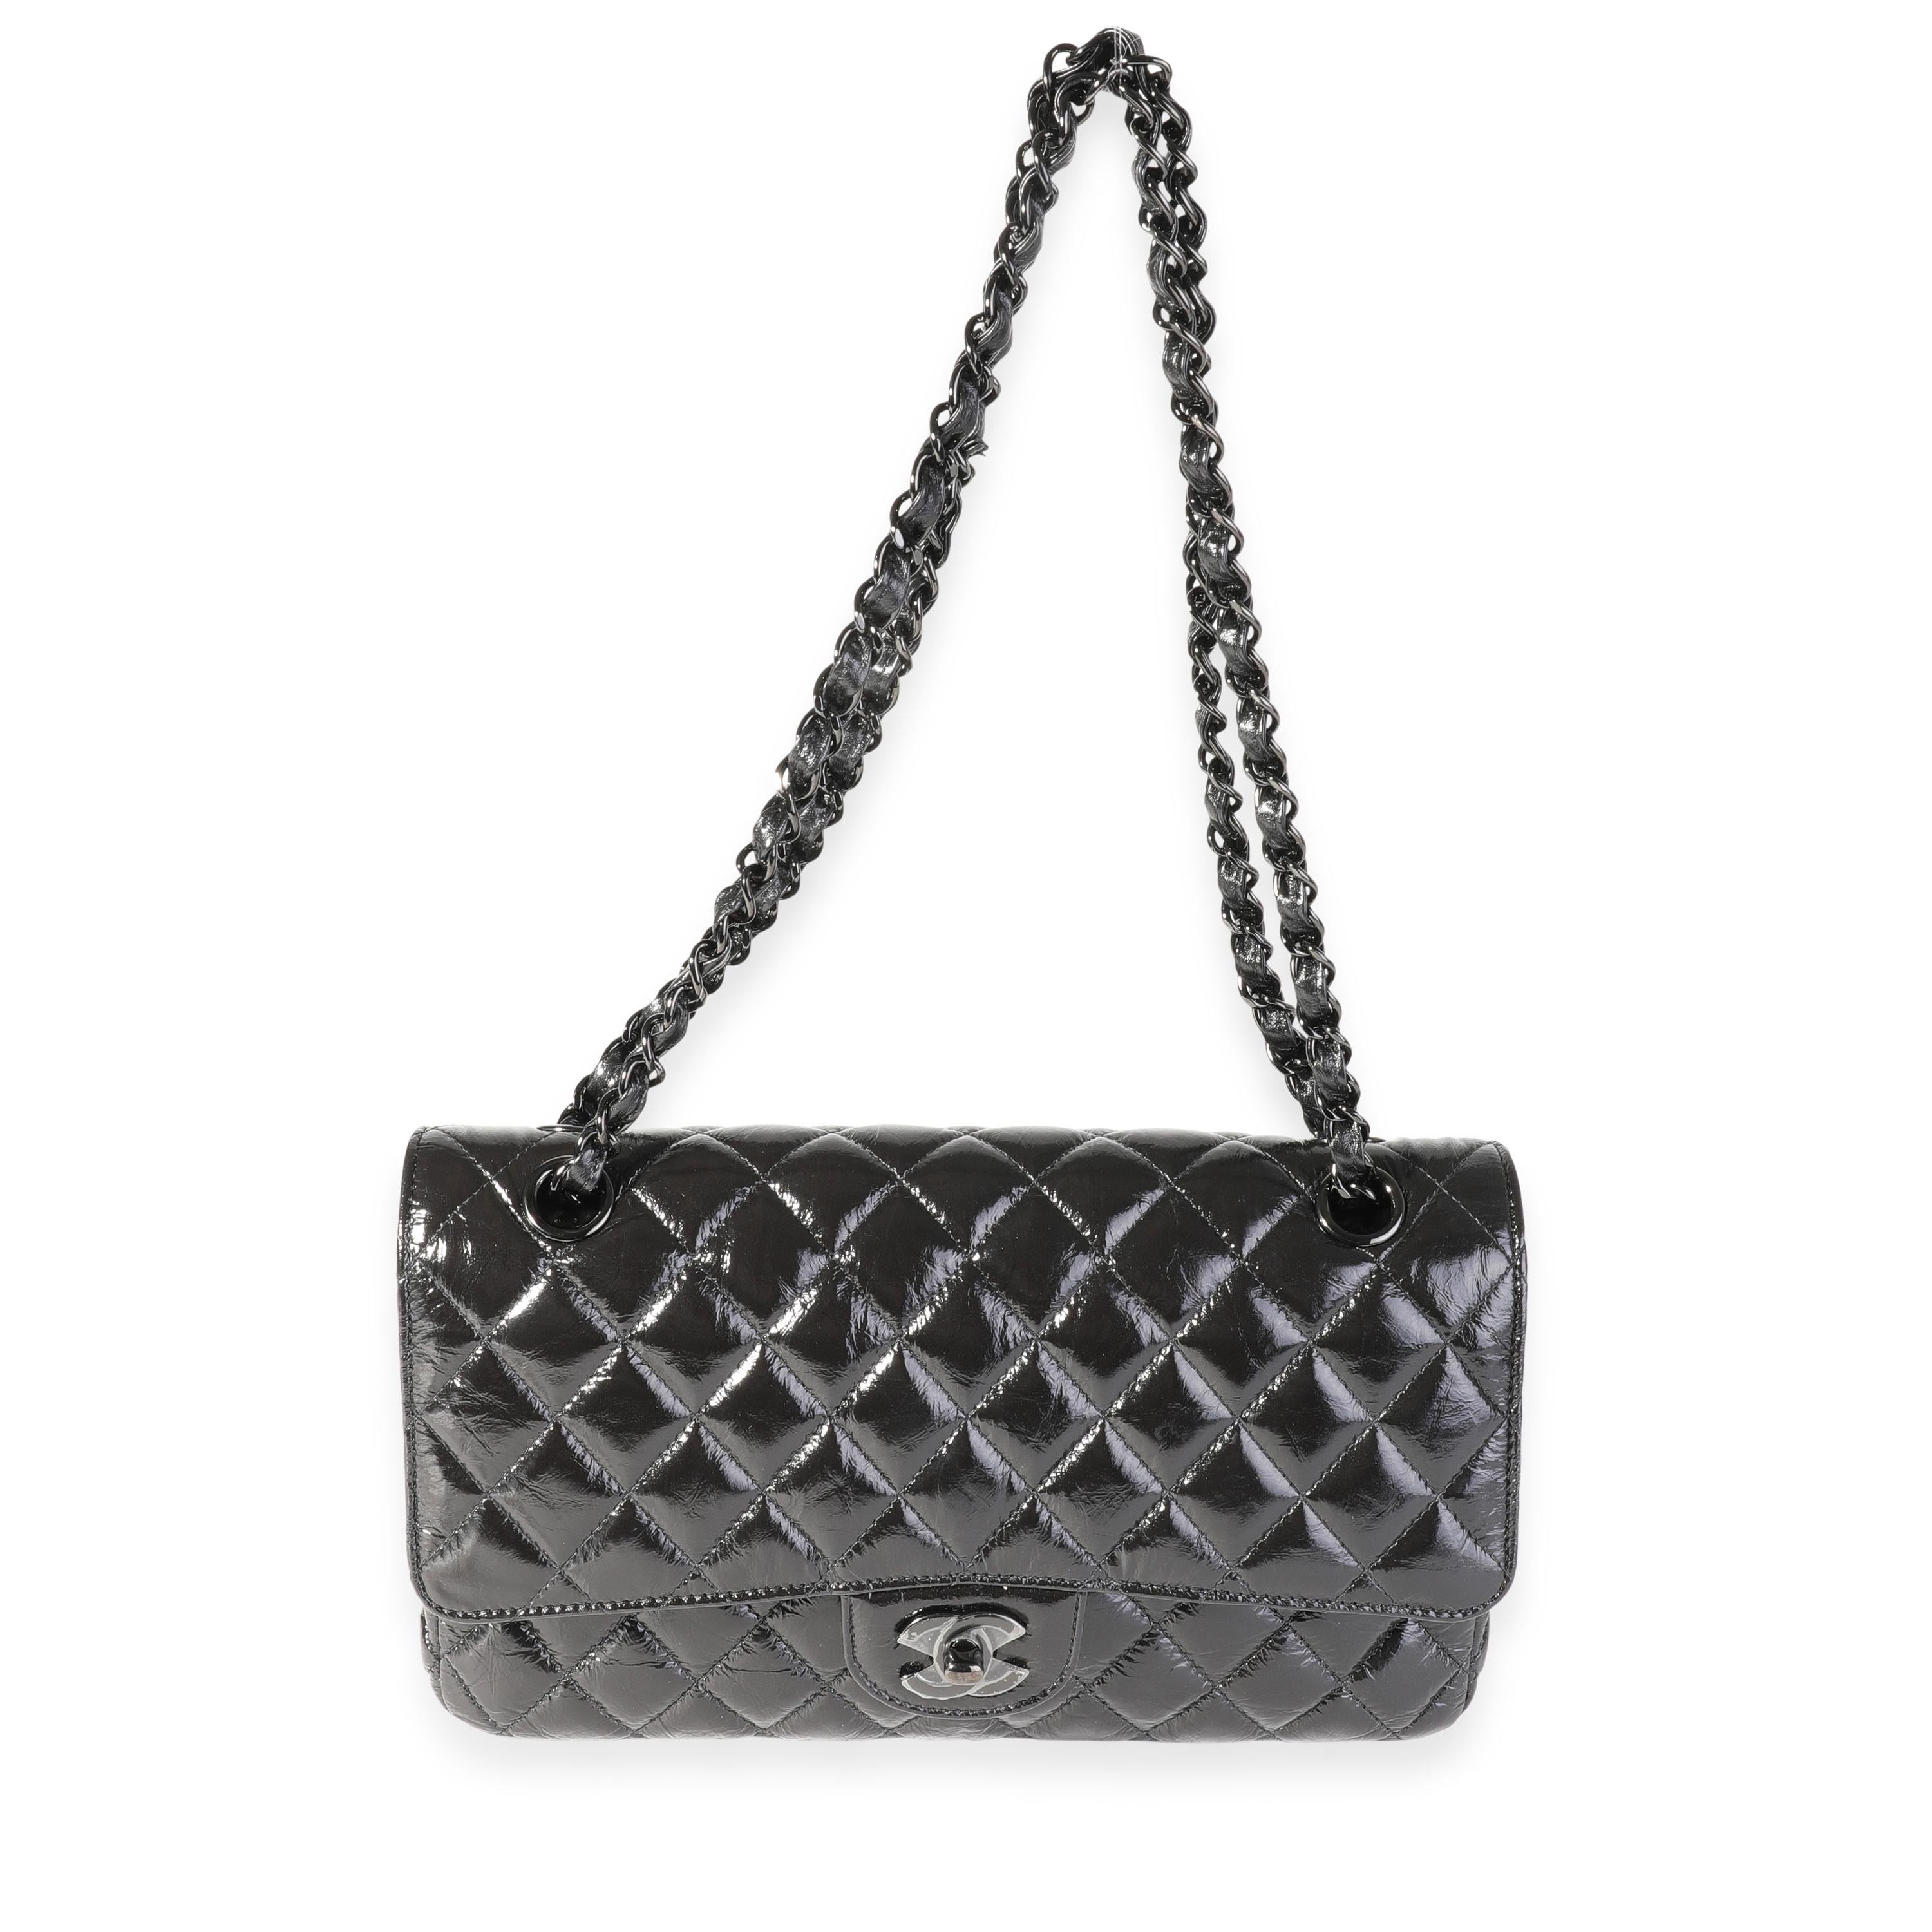 Listing Title: Chanel So Black Patent Crumpled Calfskin Medium Classic Double Flap Bag
SKU: 119434
MSRP: 8800.00
Condition: Pre-owned (3000)
Handbag Condition: Excellent
Condition Comments: Minor scuff at left corner of interior flap.
Brand: